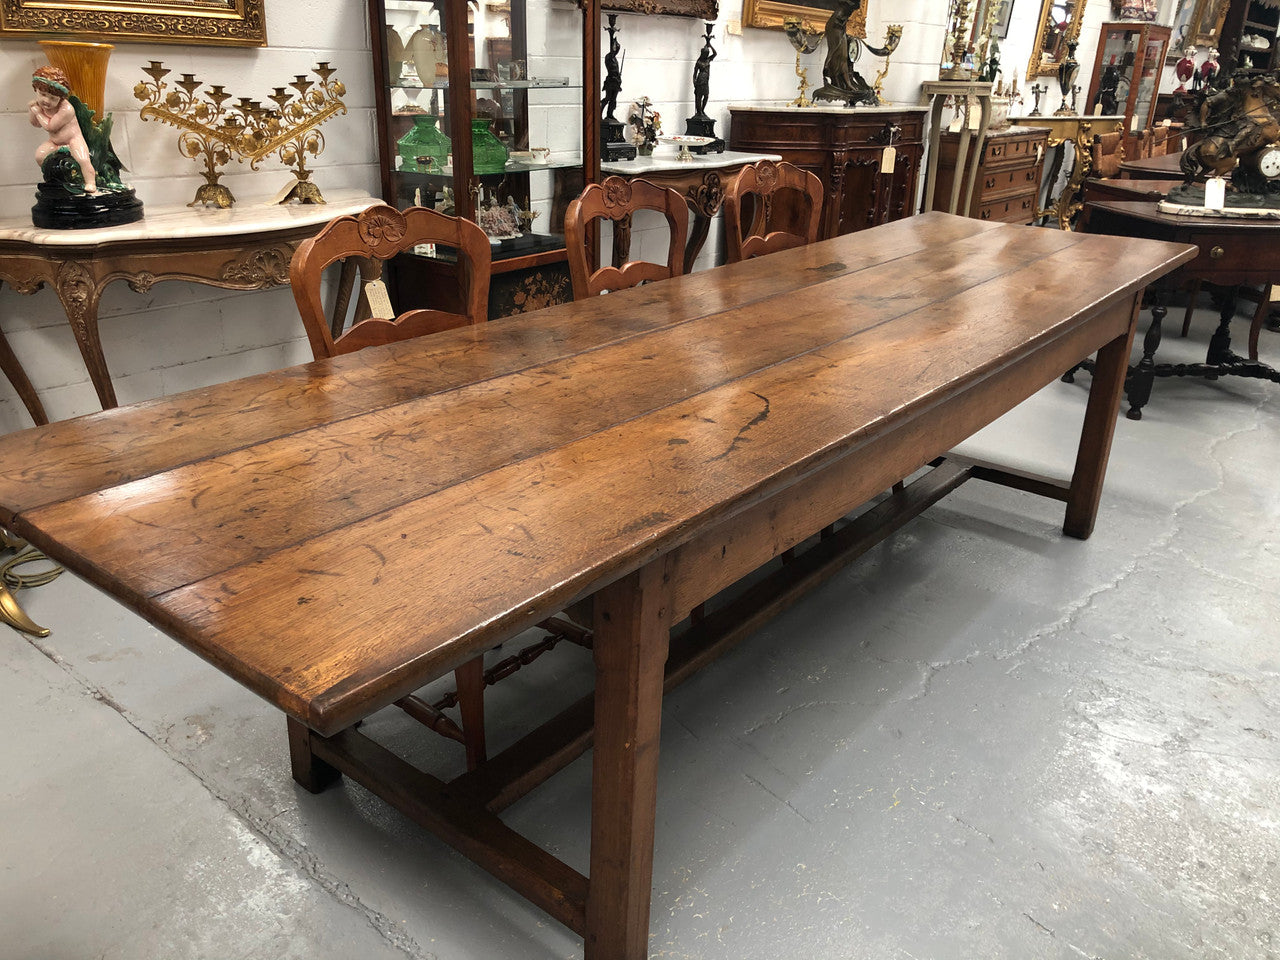 19th Century French three meter Farmhouse table with a beautiful original rustic top. In very good original detailed condition.